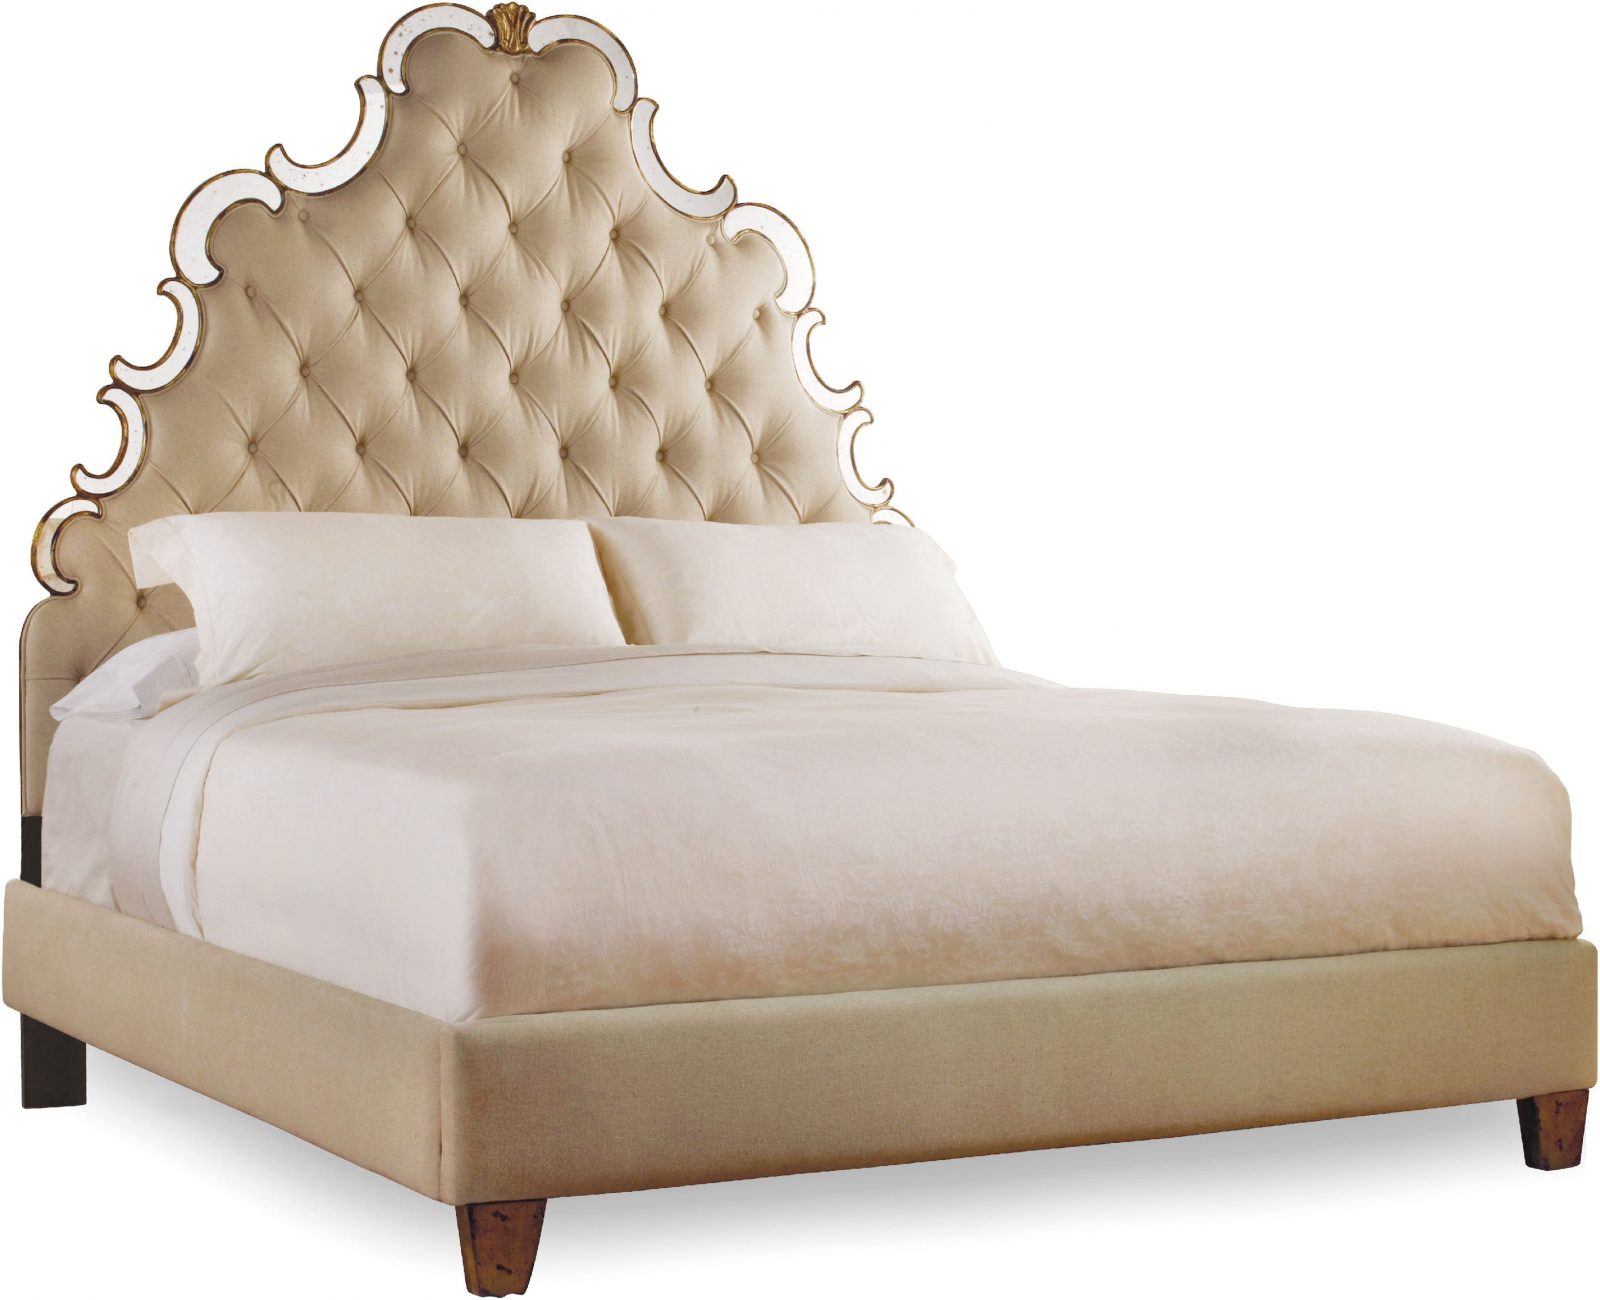 Sanctuary Tufted Bed 5/0 Queen